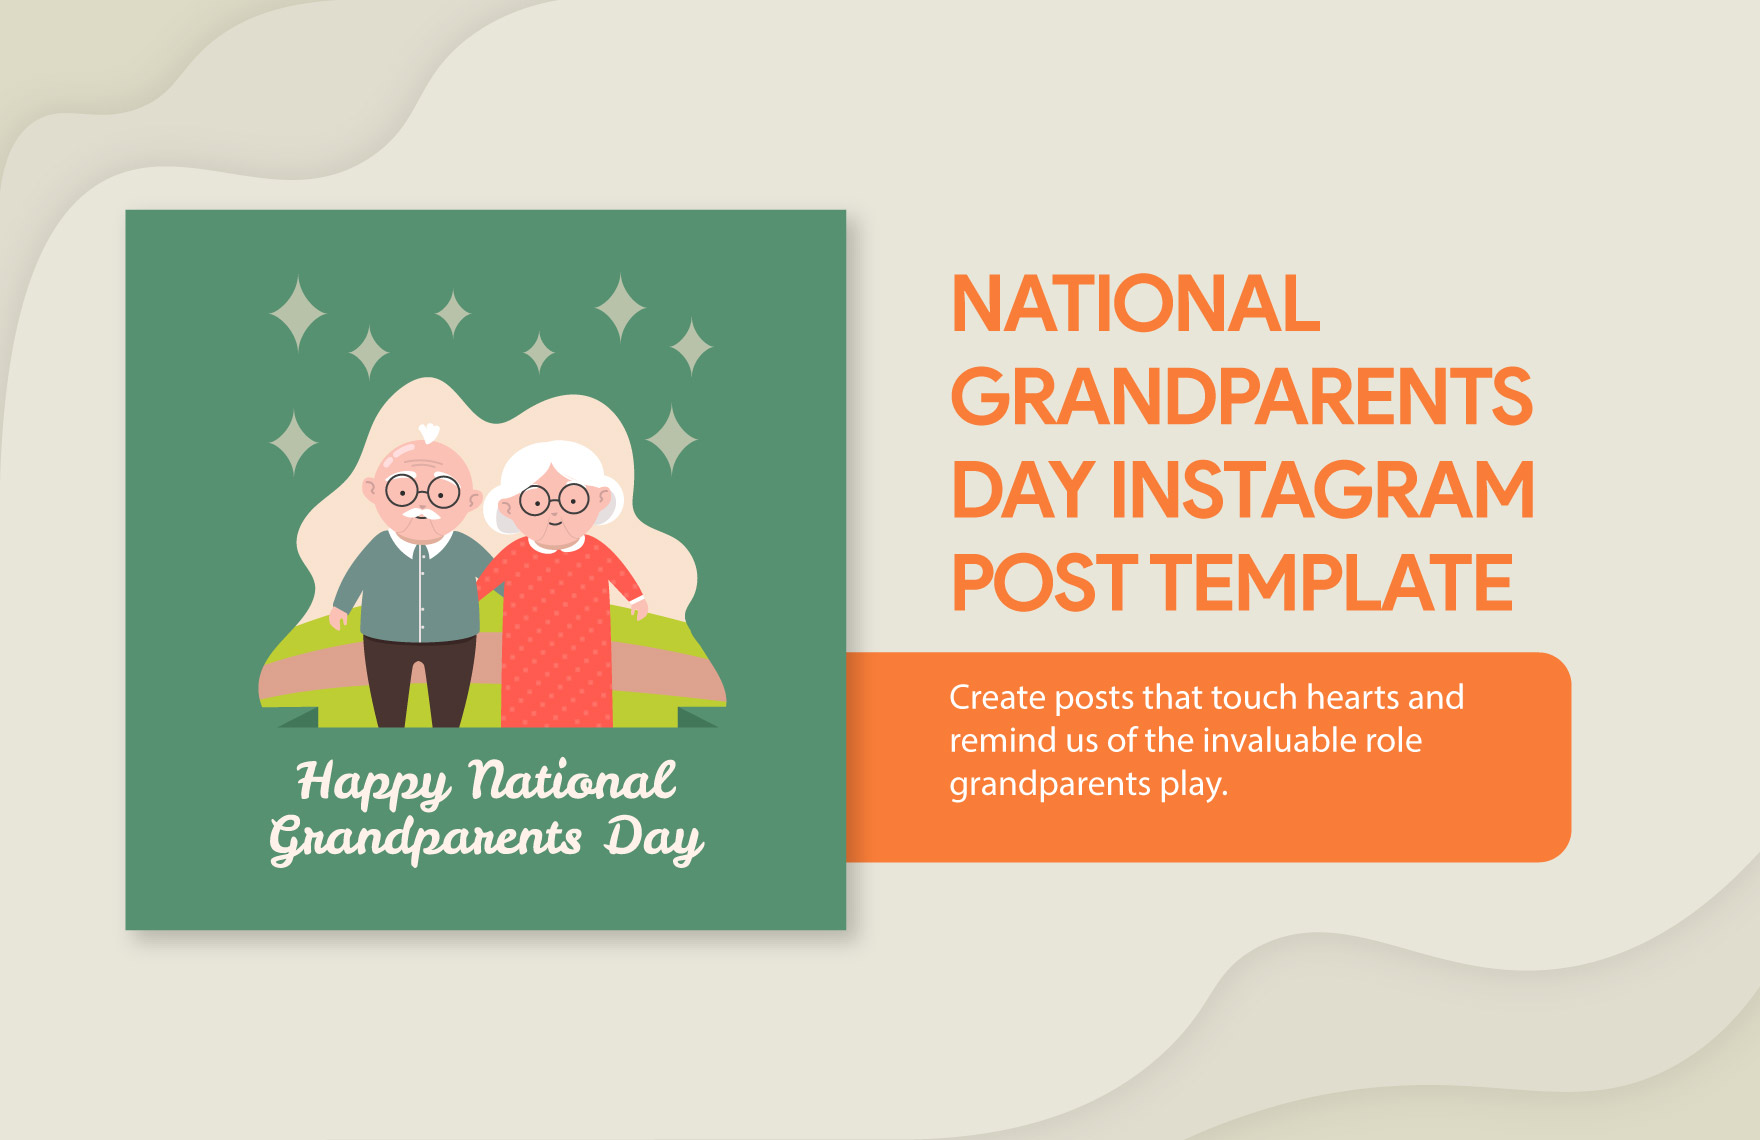 National Grandparents Day Instagram Post Template